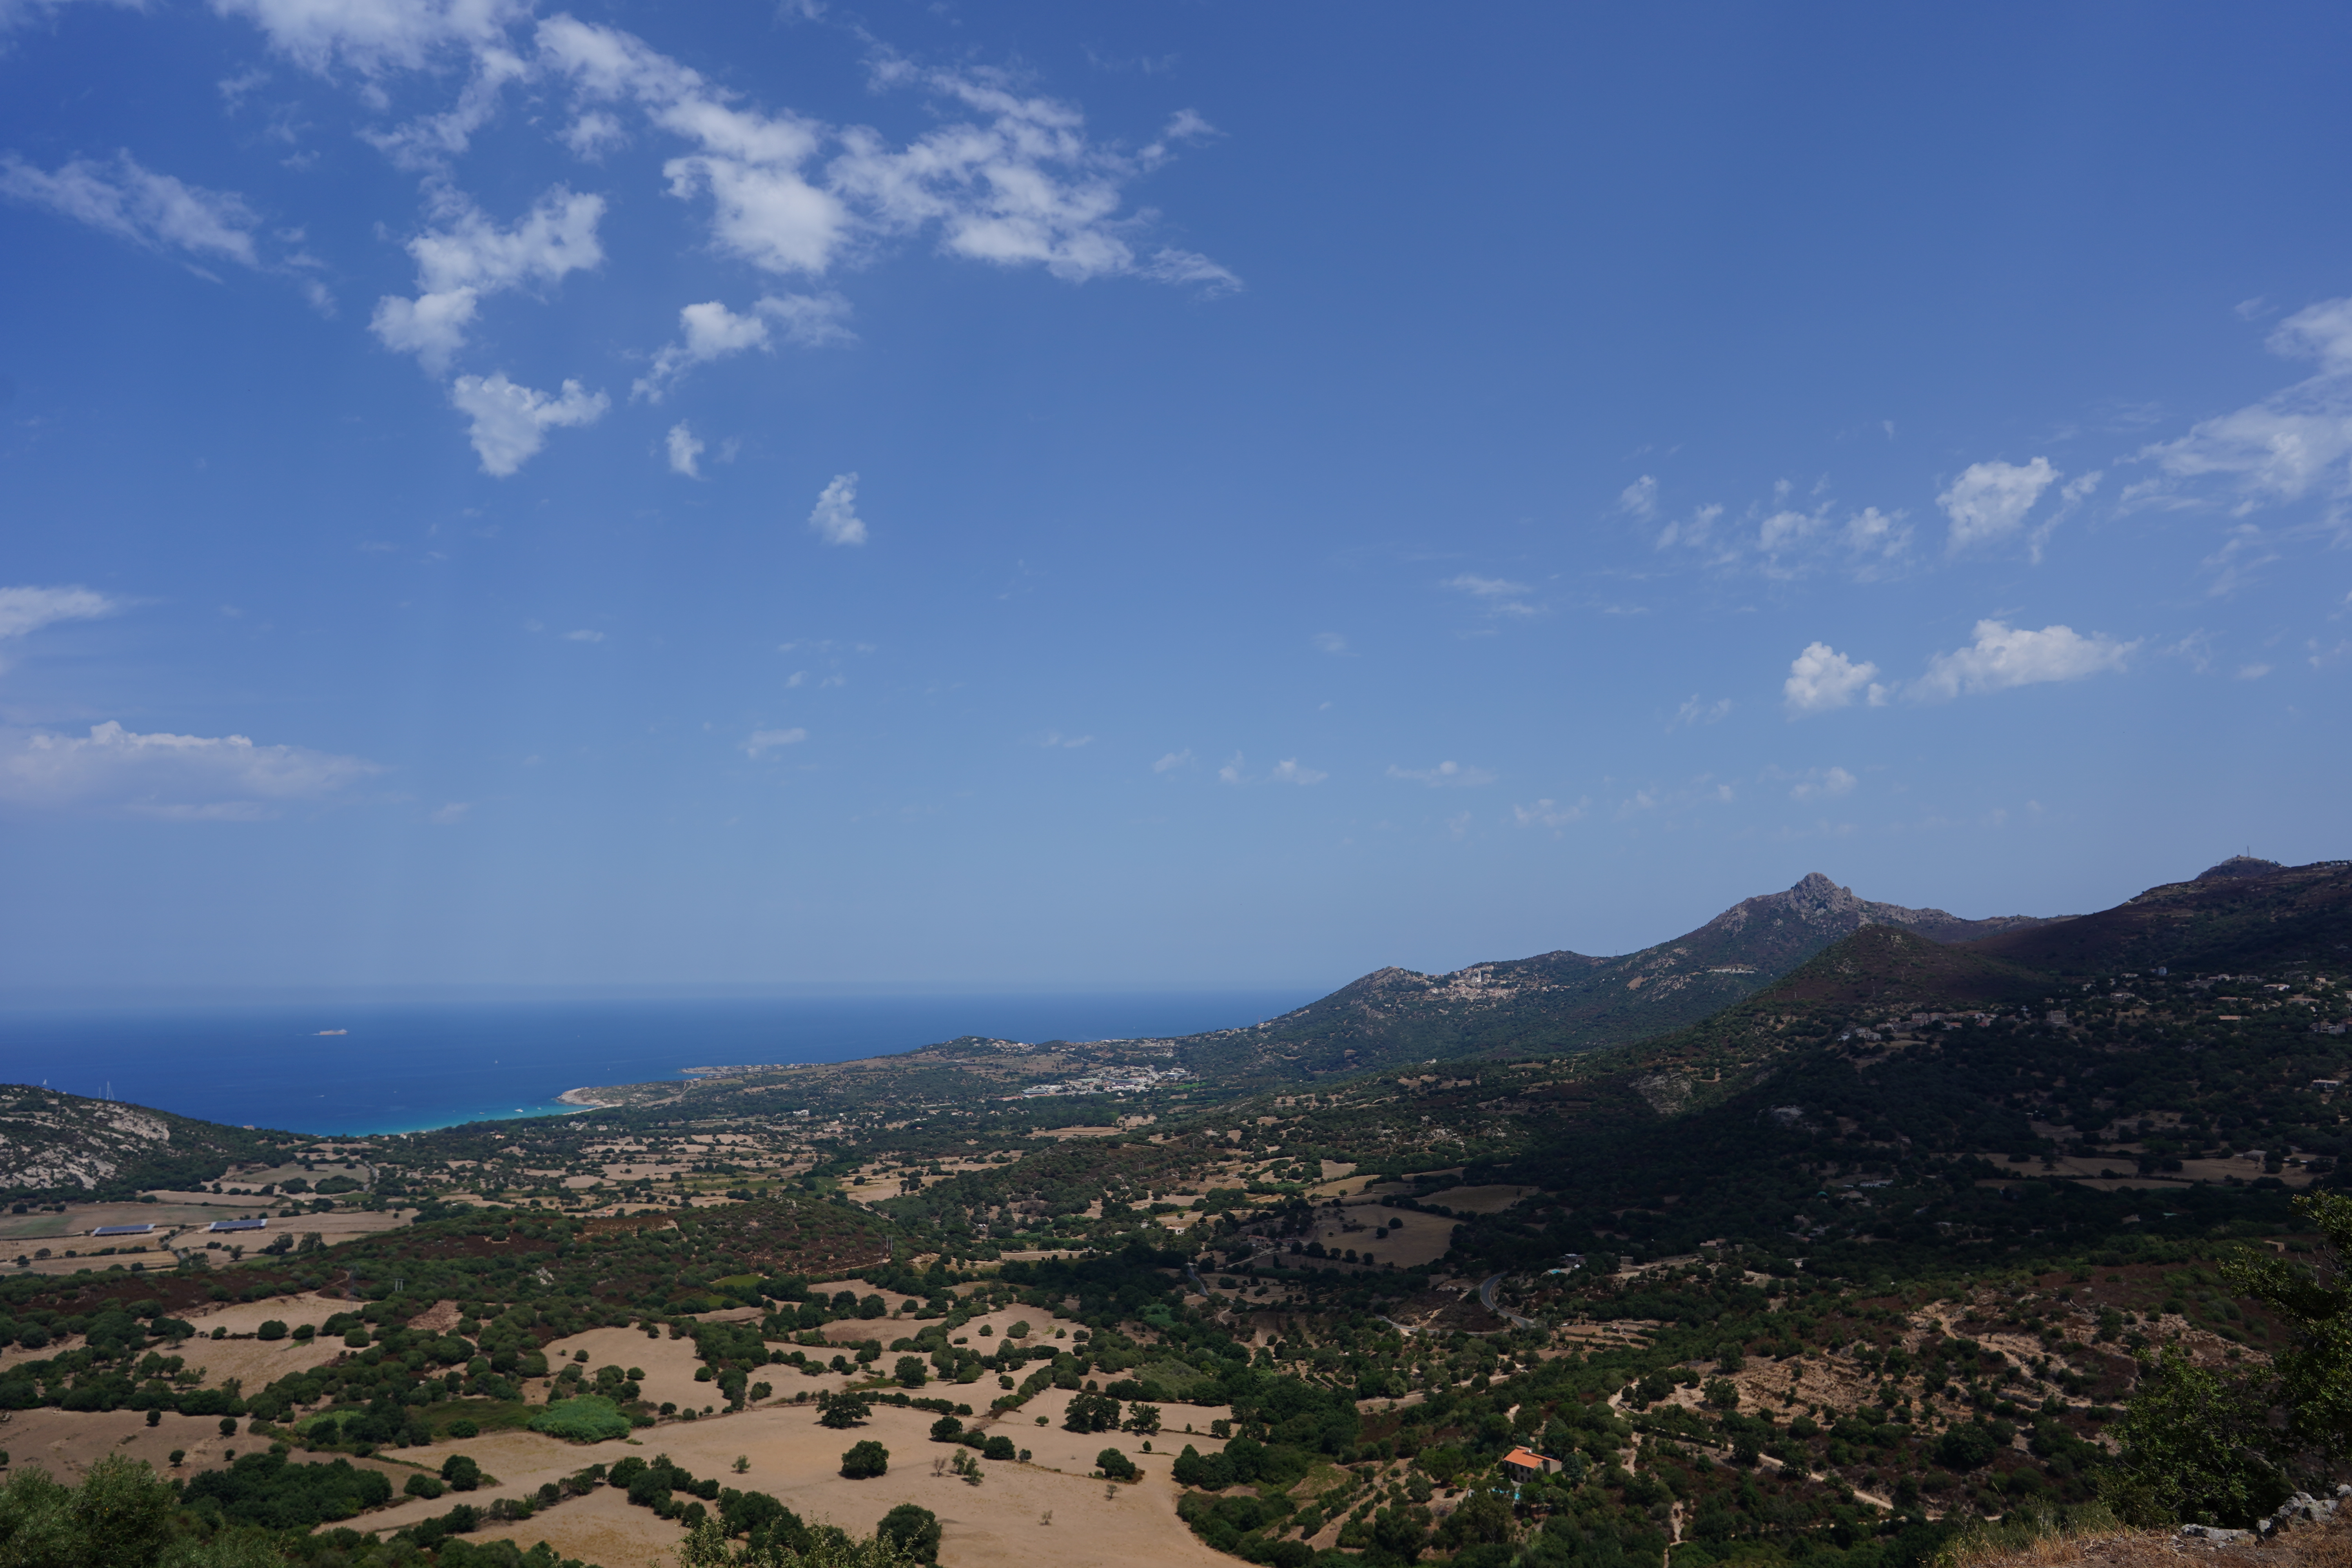 A view of the plains and hills, near the Mediterranean sea, near Calvi, taken from high up